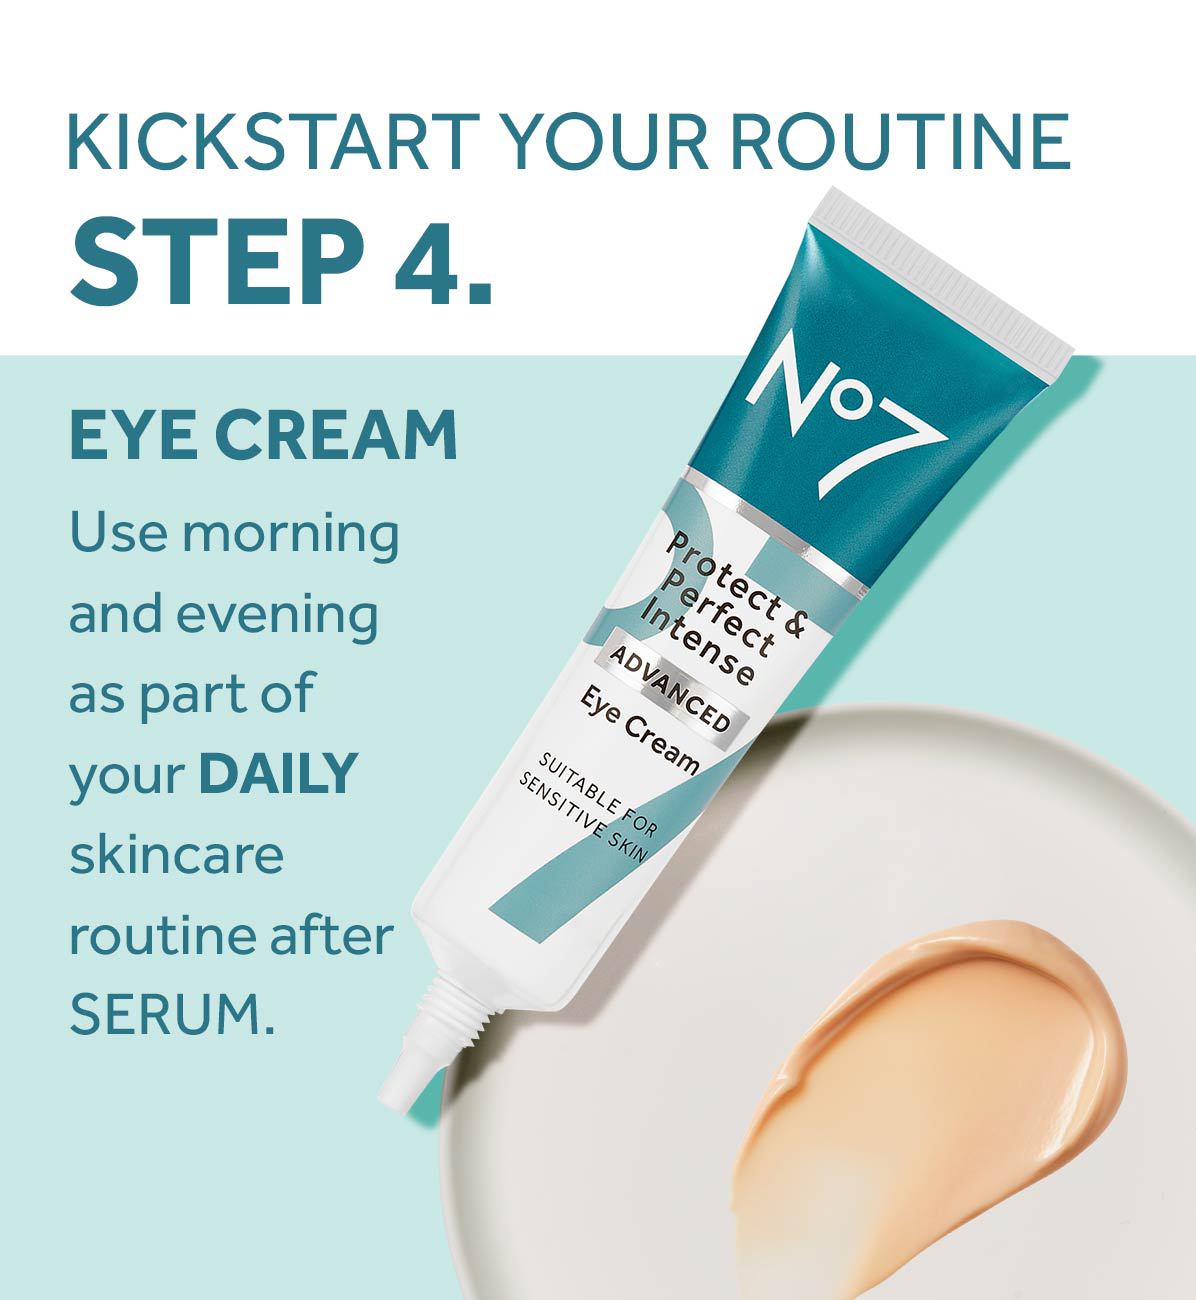 KICKSTART YOUR ROUTINESTEP 4.EYE CREAMUse morning and evening as part of your DAILY skincare routine afterSERUM.